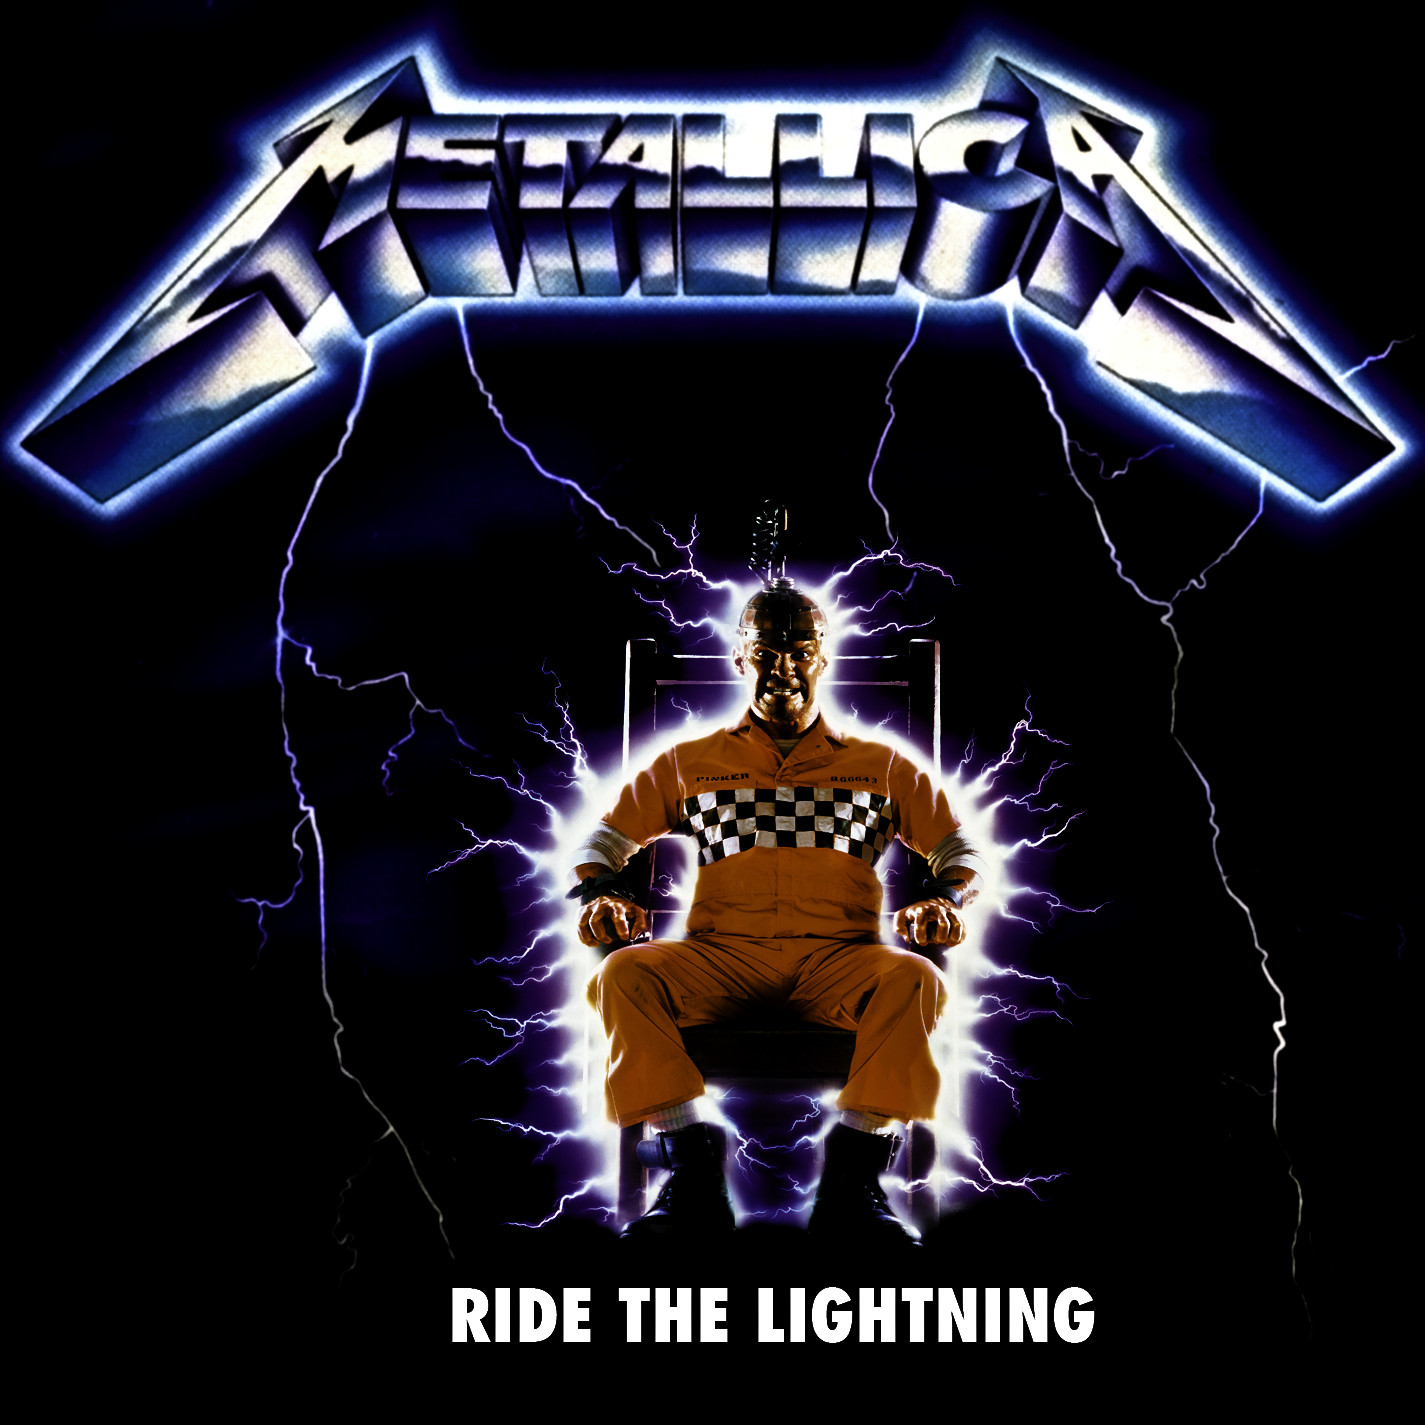 Best ideas about Ride The Lighting
. Save or Pin Metallica Ride The Lightning Wallpaper WallpaperSafari Now.